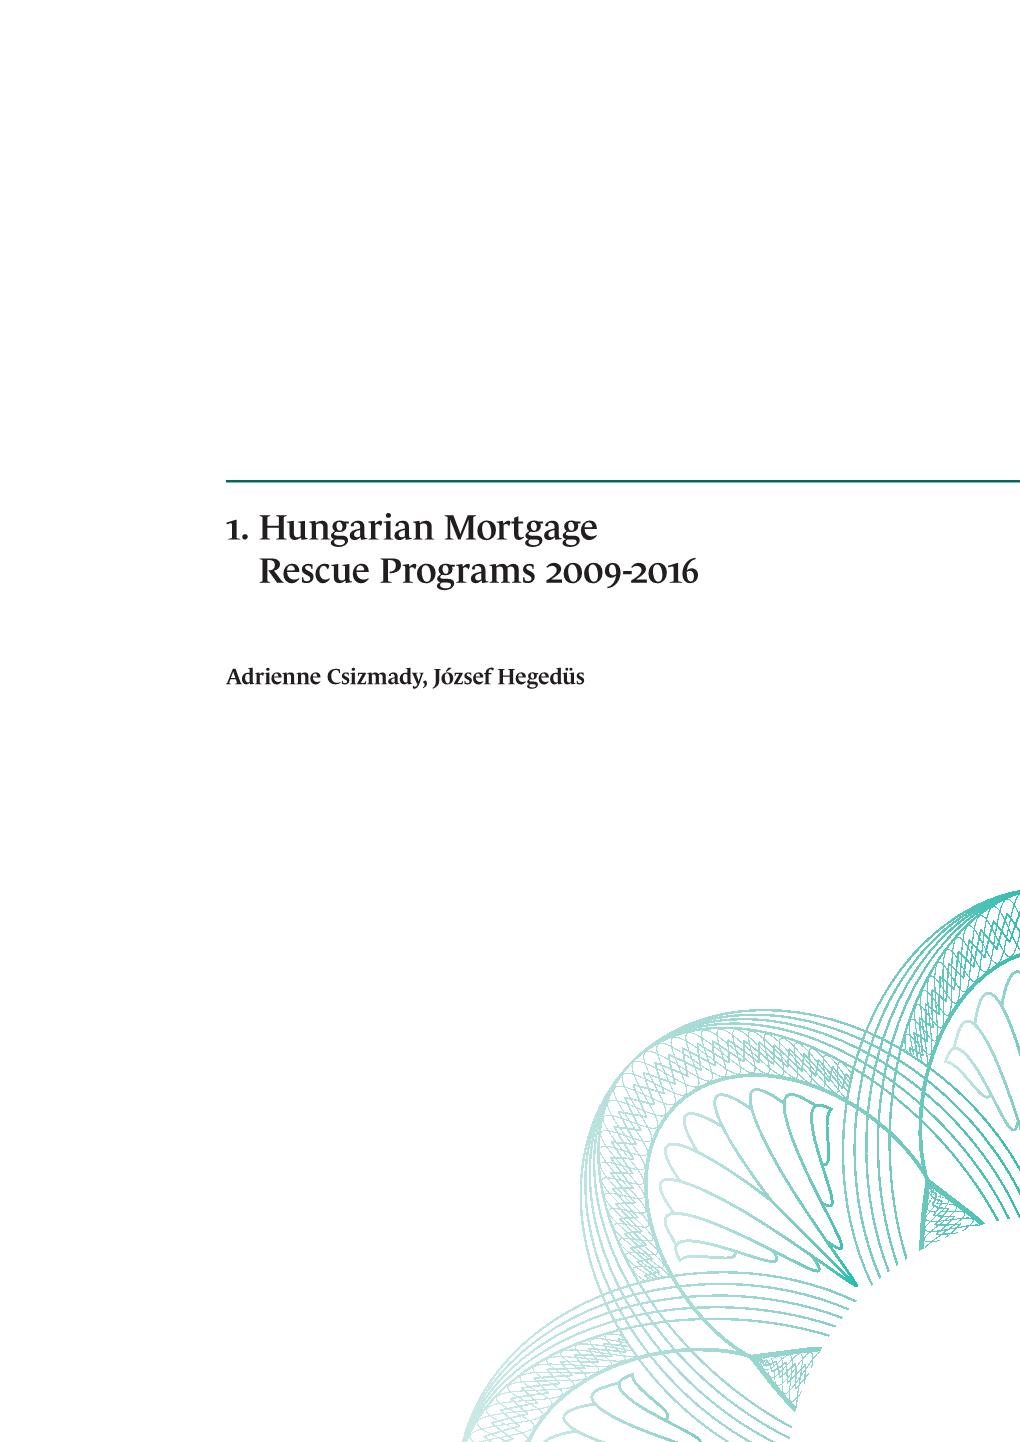 1. Hungarian Mortgage Rescue Programs 2009-2016